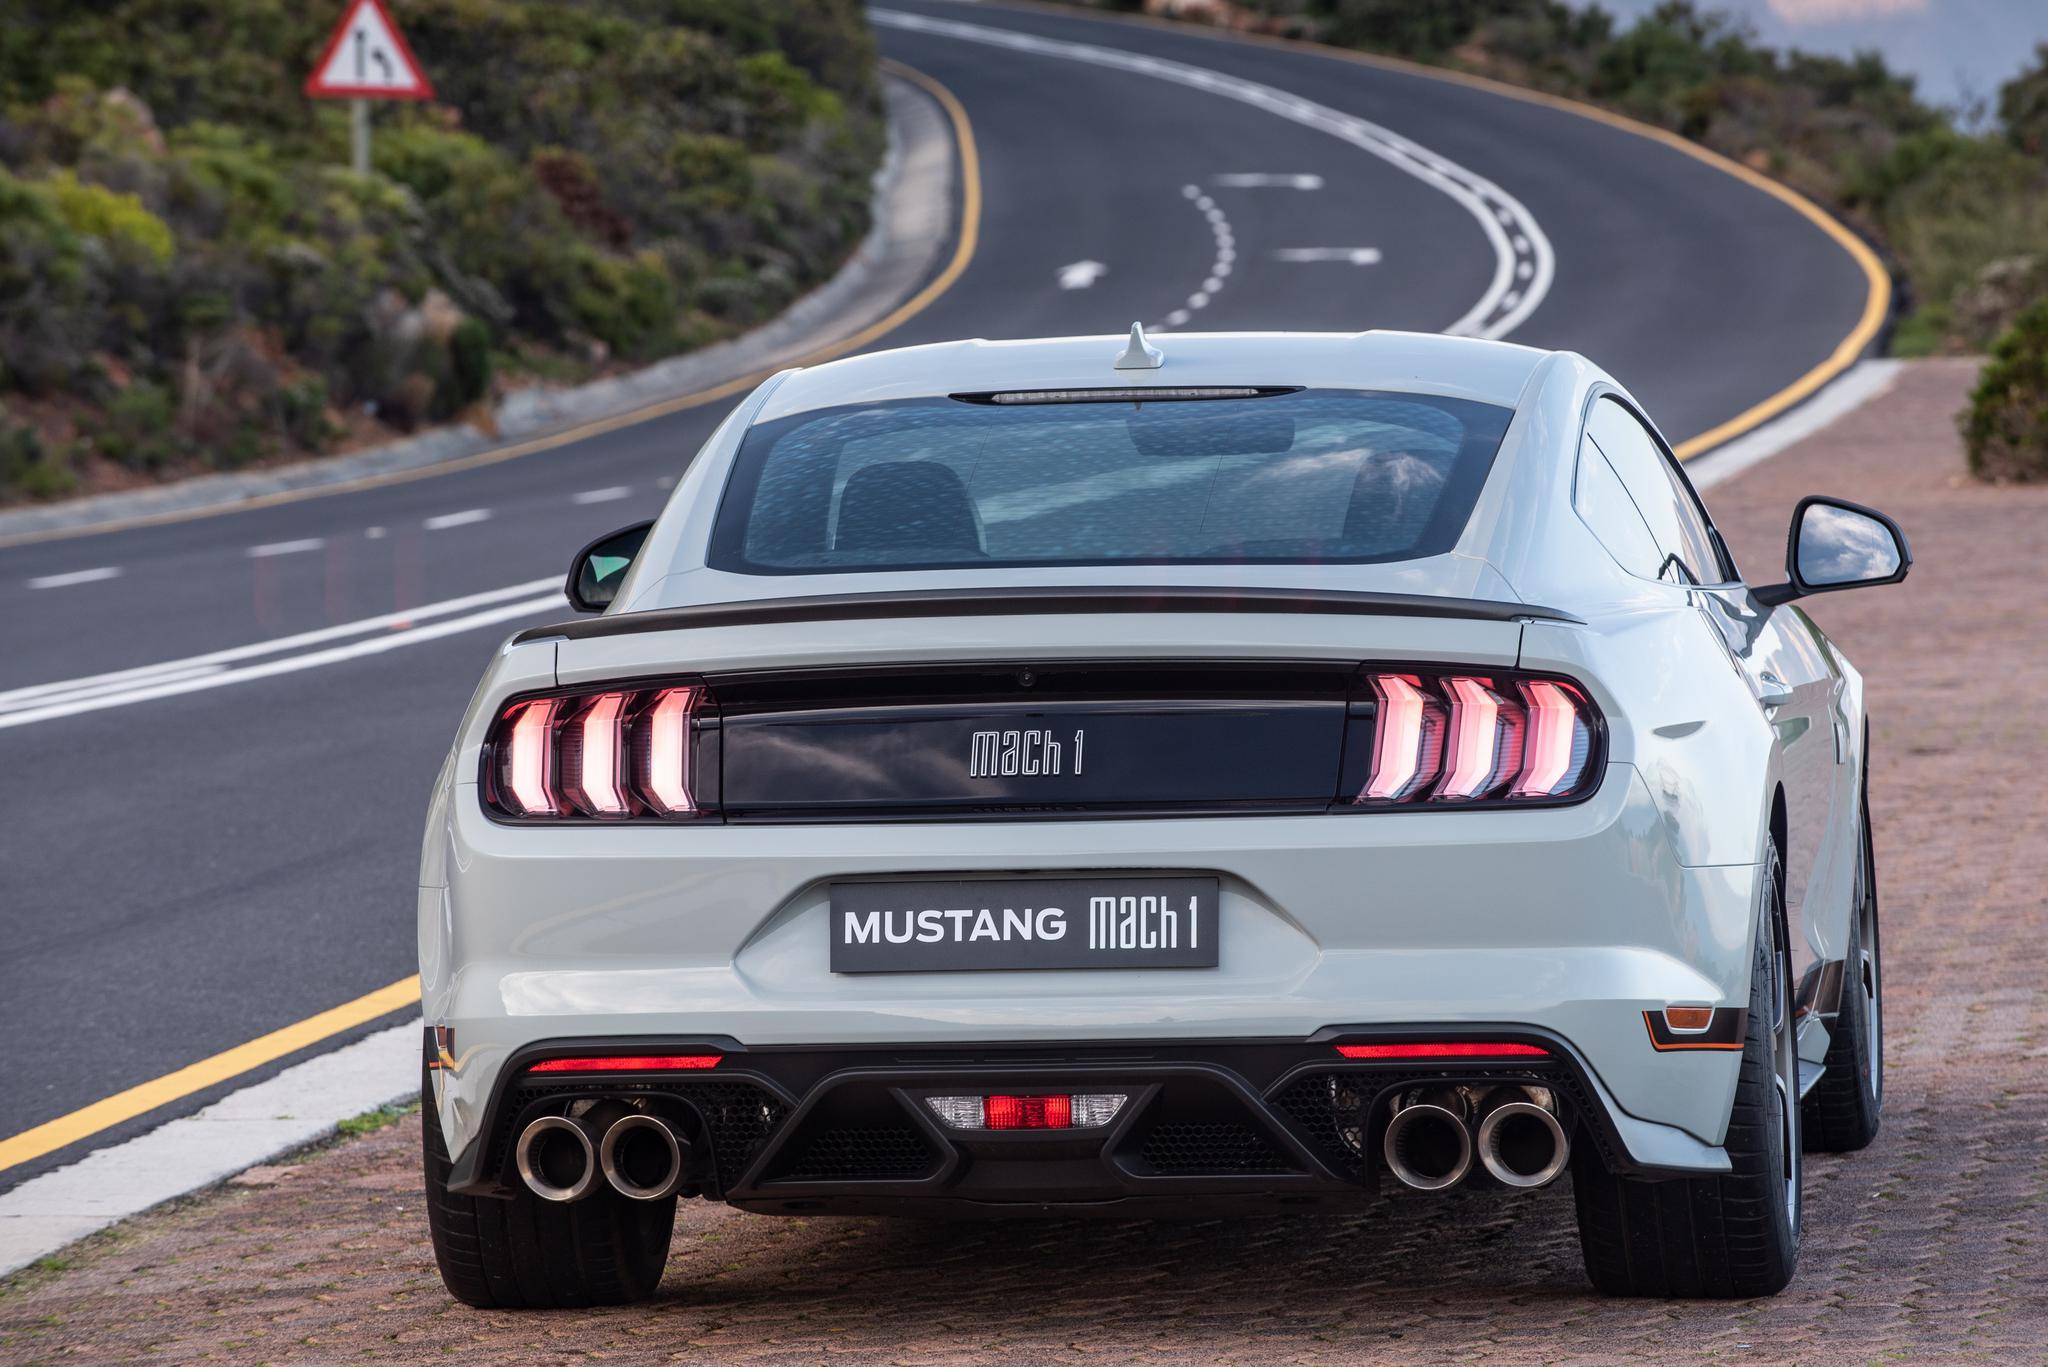 The 2021 Mustang Mach 1 exhaust pipes